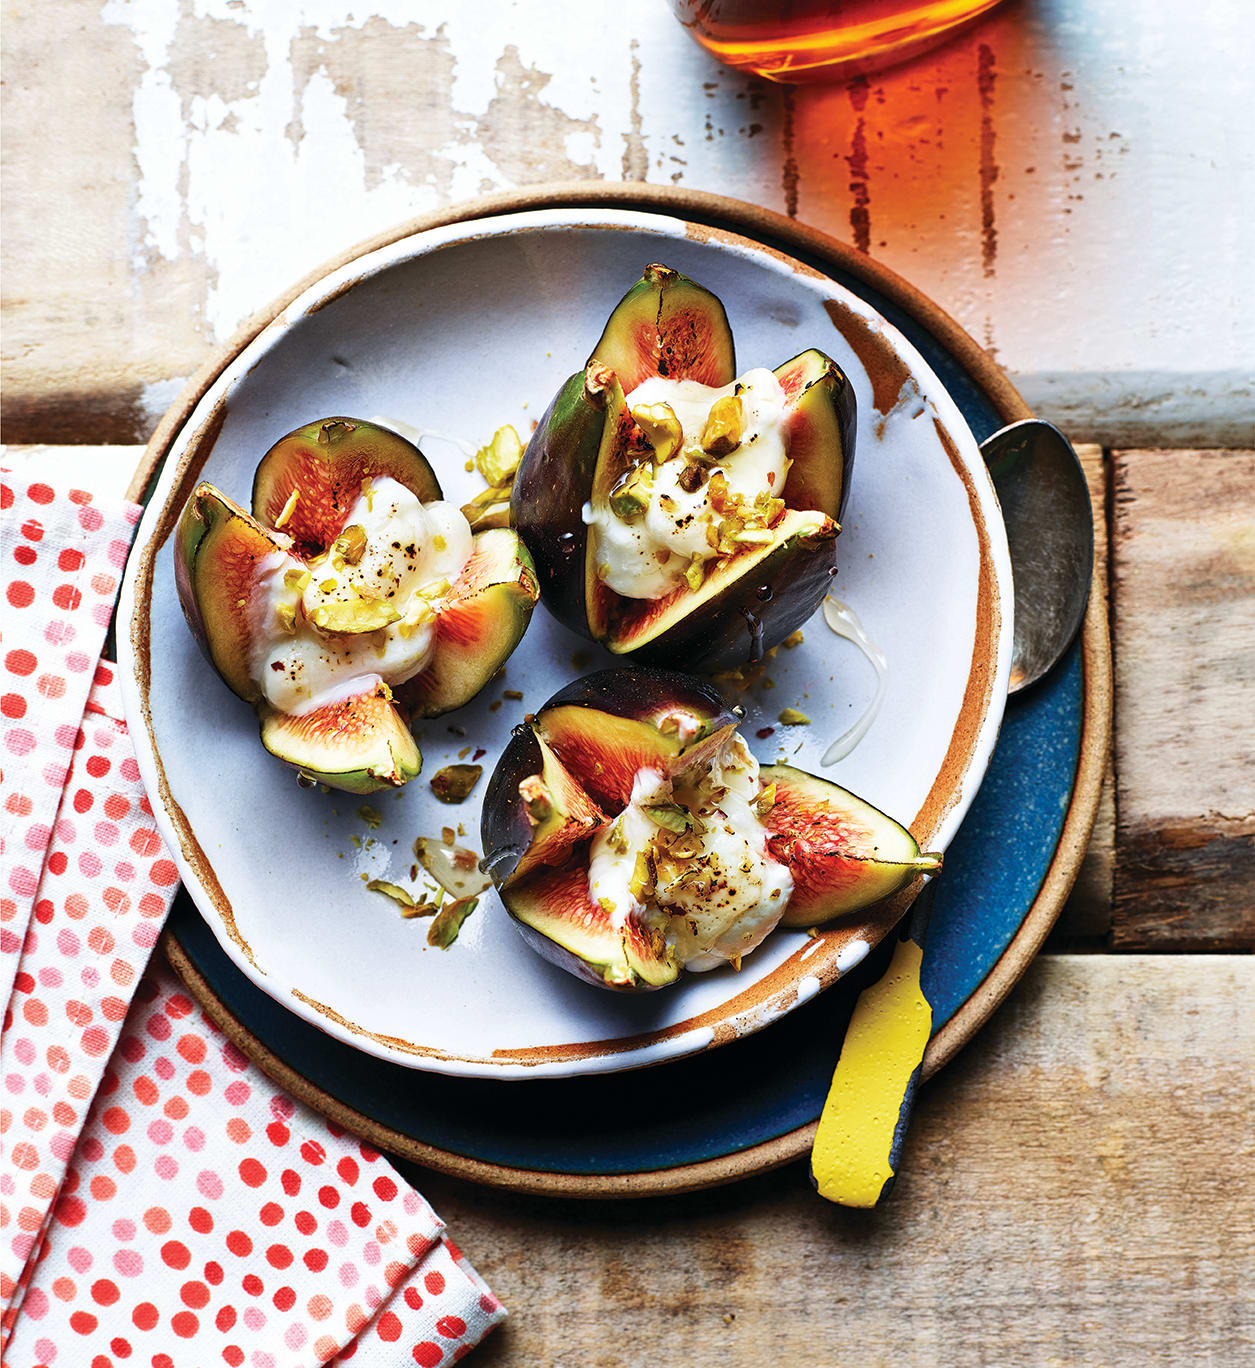 Photo of Baked figs with ricotta & pistachios by WW